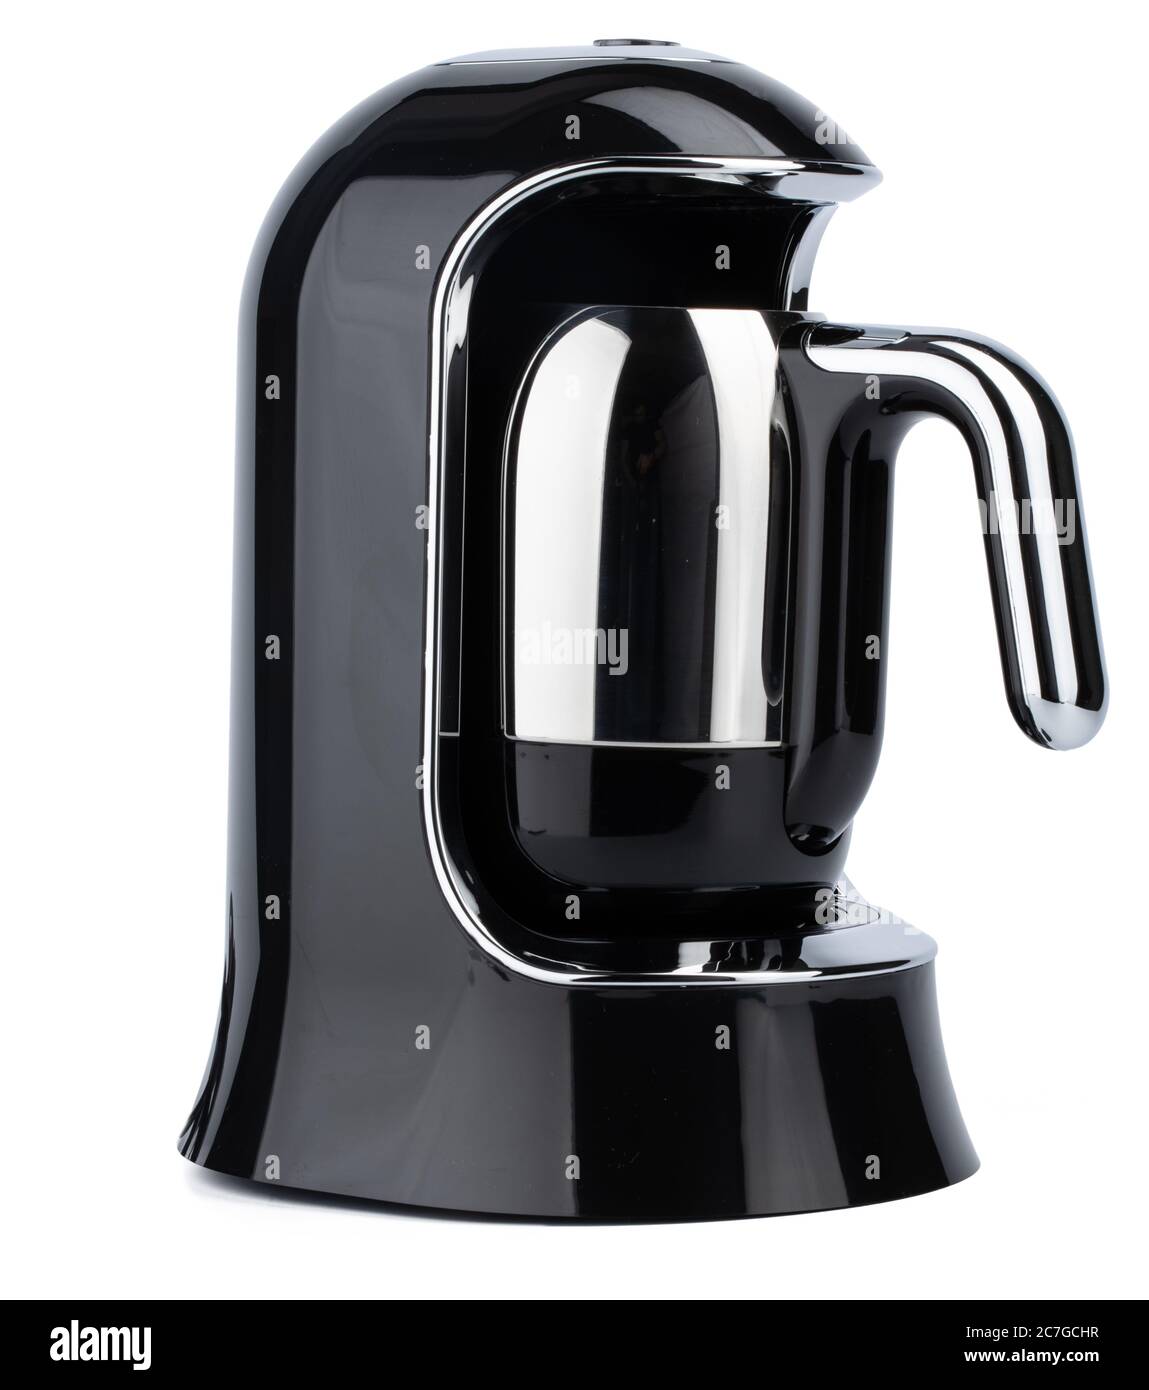 https://c8.alamy.com/comp/2C7GCHR/electric-kettle-on-a-stand-isolated-on-white-2C7GCHR.jpg